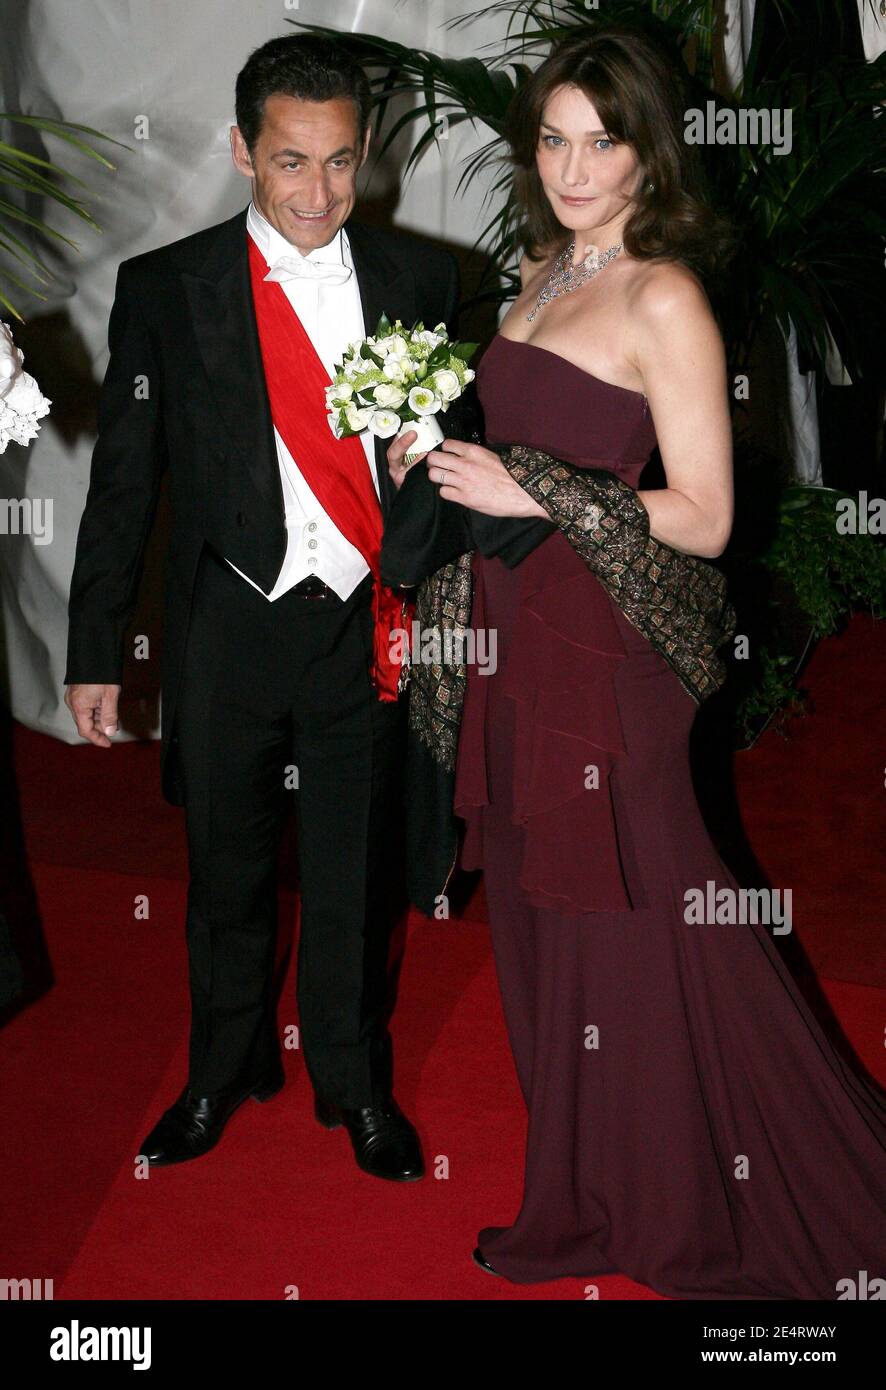 French President Nicolas Sarkozy and his wife Carla Bruni-Sarkozy arrive at the Guildhall for a diner offered by London city mayor, David Lewis in London, UK on March 27, 2008. Photo by Alain Benainous/Pool/ABACAPRESS.COM Stock Photo